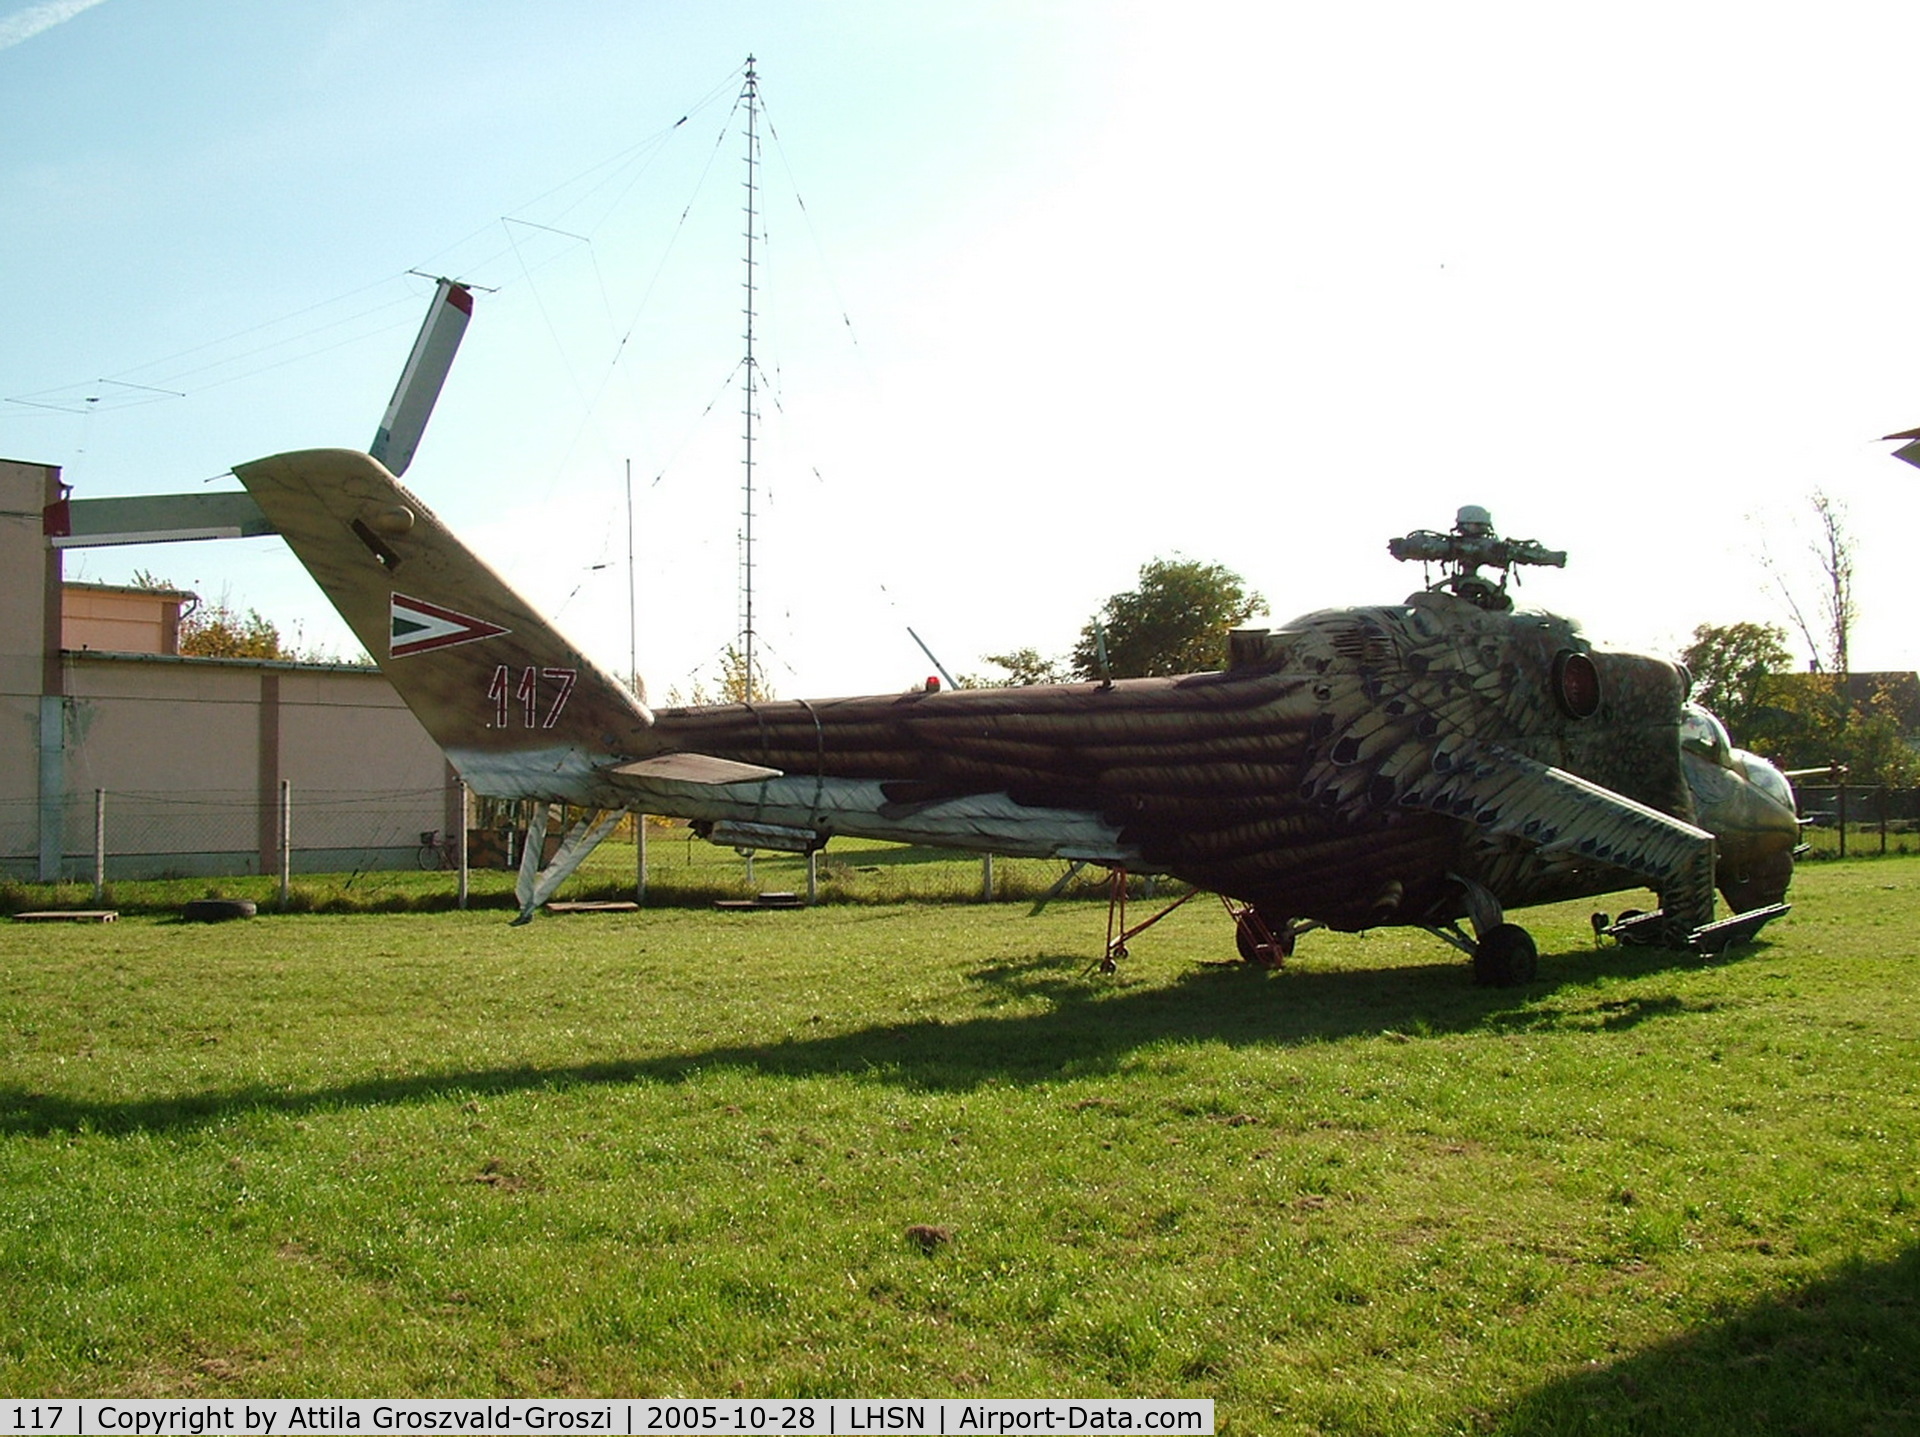 117, 1980 Mil Mi-24D Hind D C/N K20117, Szolnok airplane museum, Hungary (Hungary is not in operation